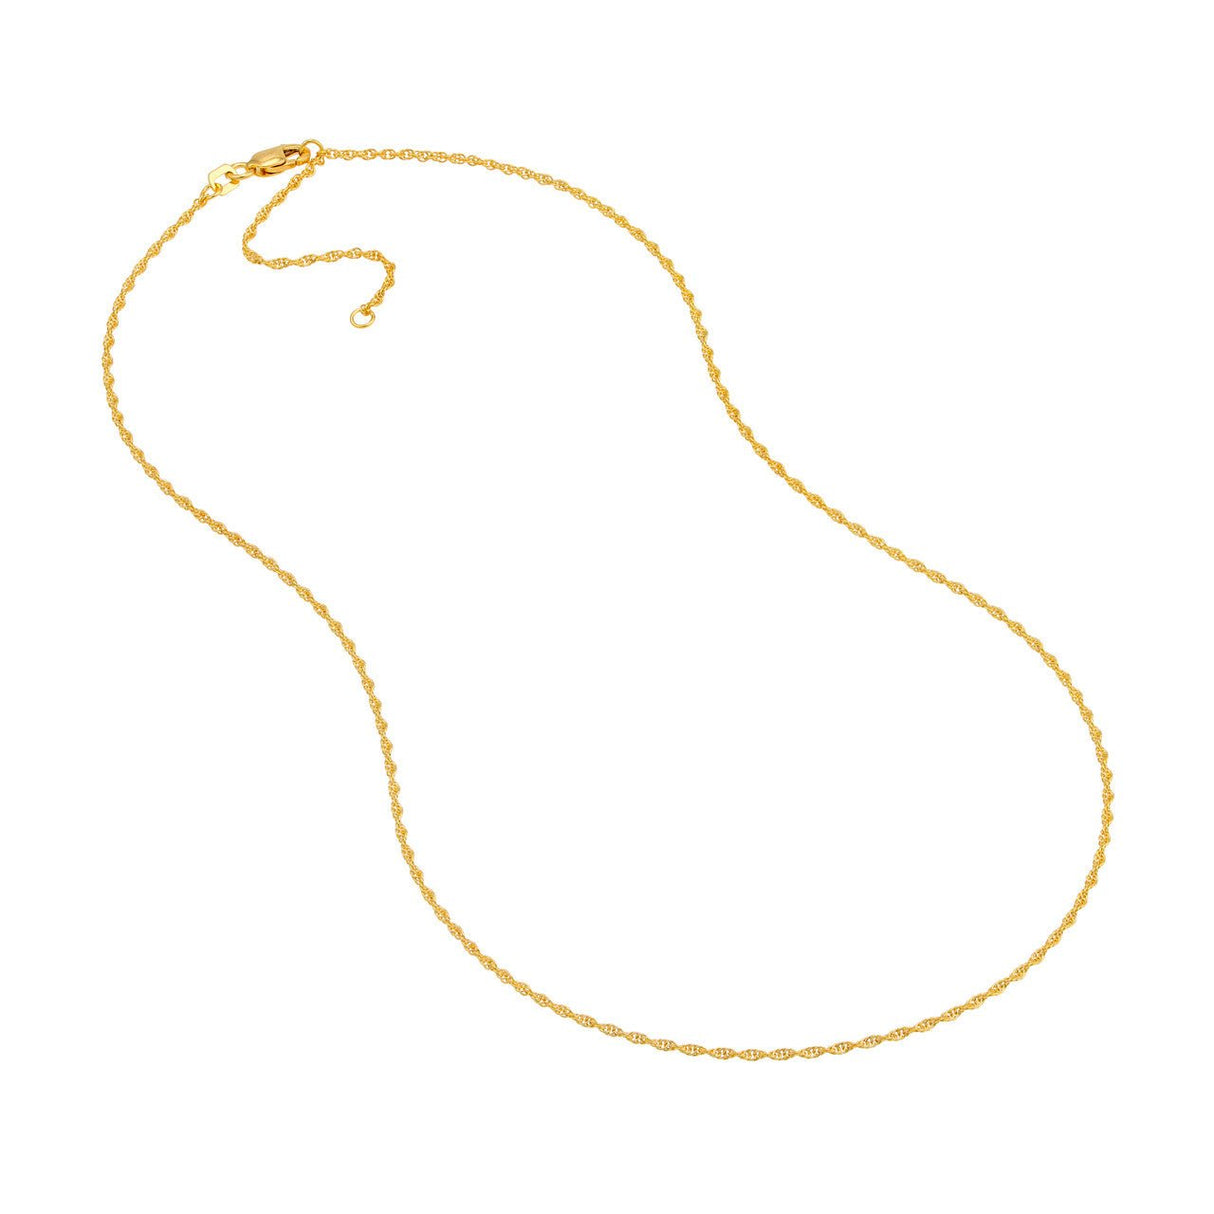 0.8mm Diamond-Cut Hollow Twisted Link Chain Necklace in 14K Gold - 18